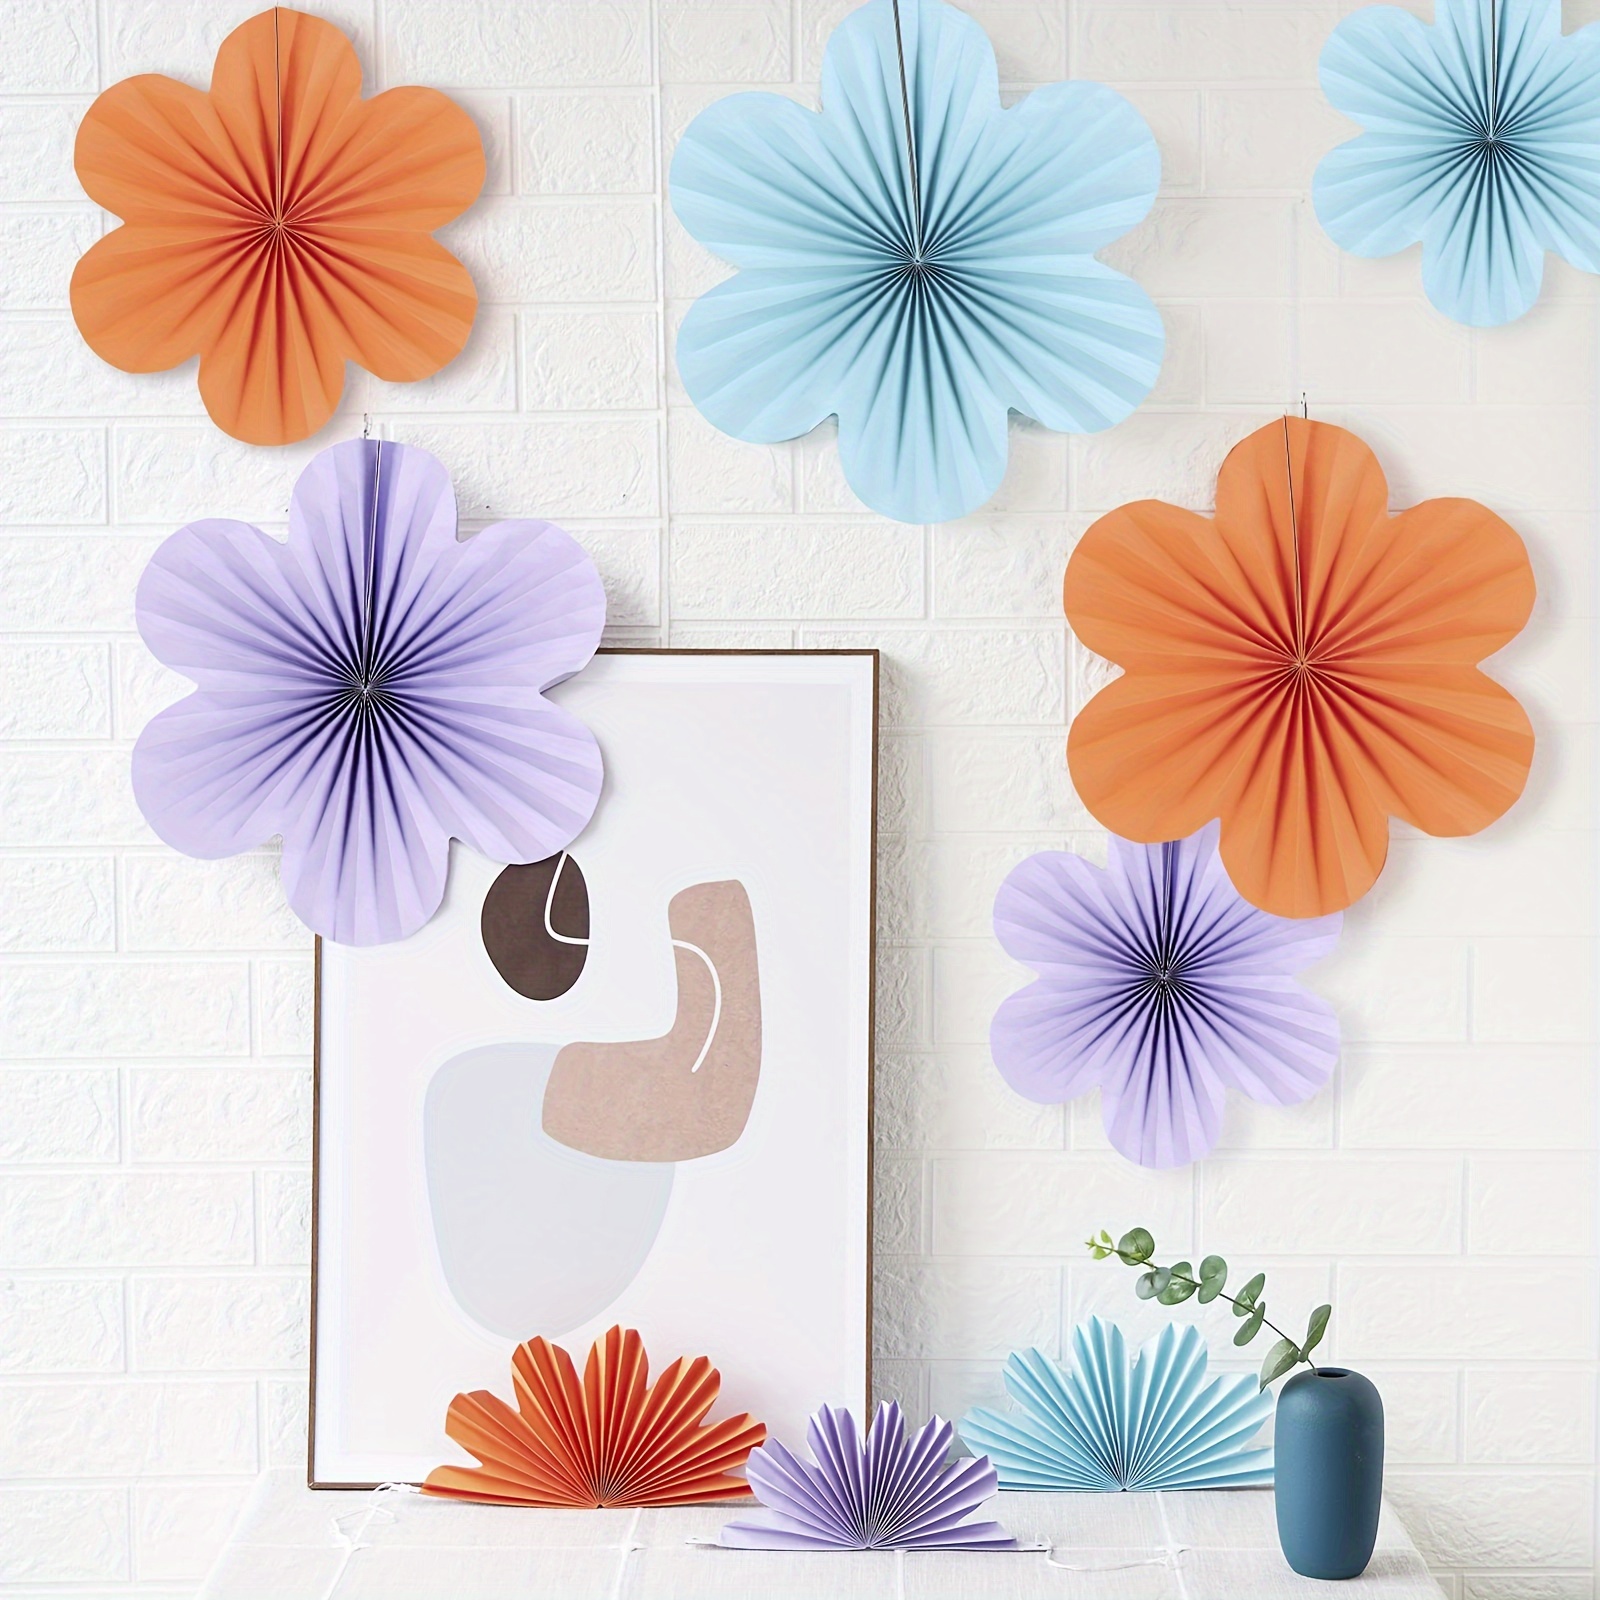 

9-pack Tissue Pom Poms Flower Decorations, Paper Fan Classroom Decor, Hanging Wall Decor In Orange, Blue, And Purple For Special Occasions